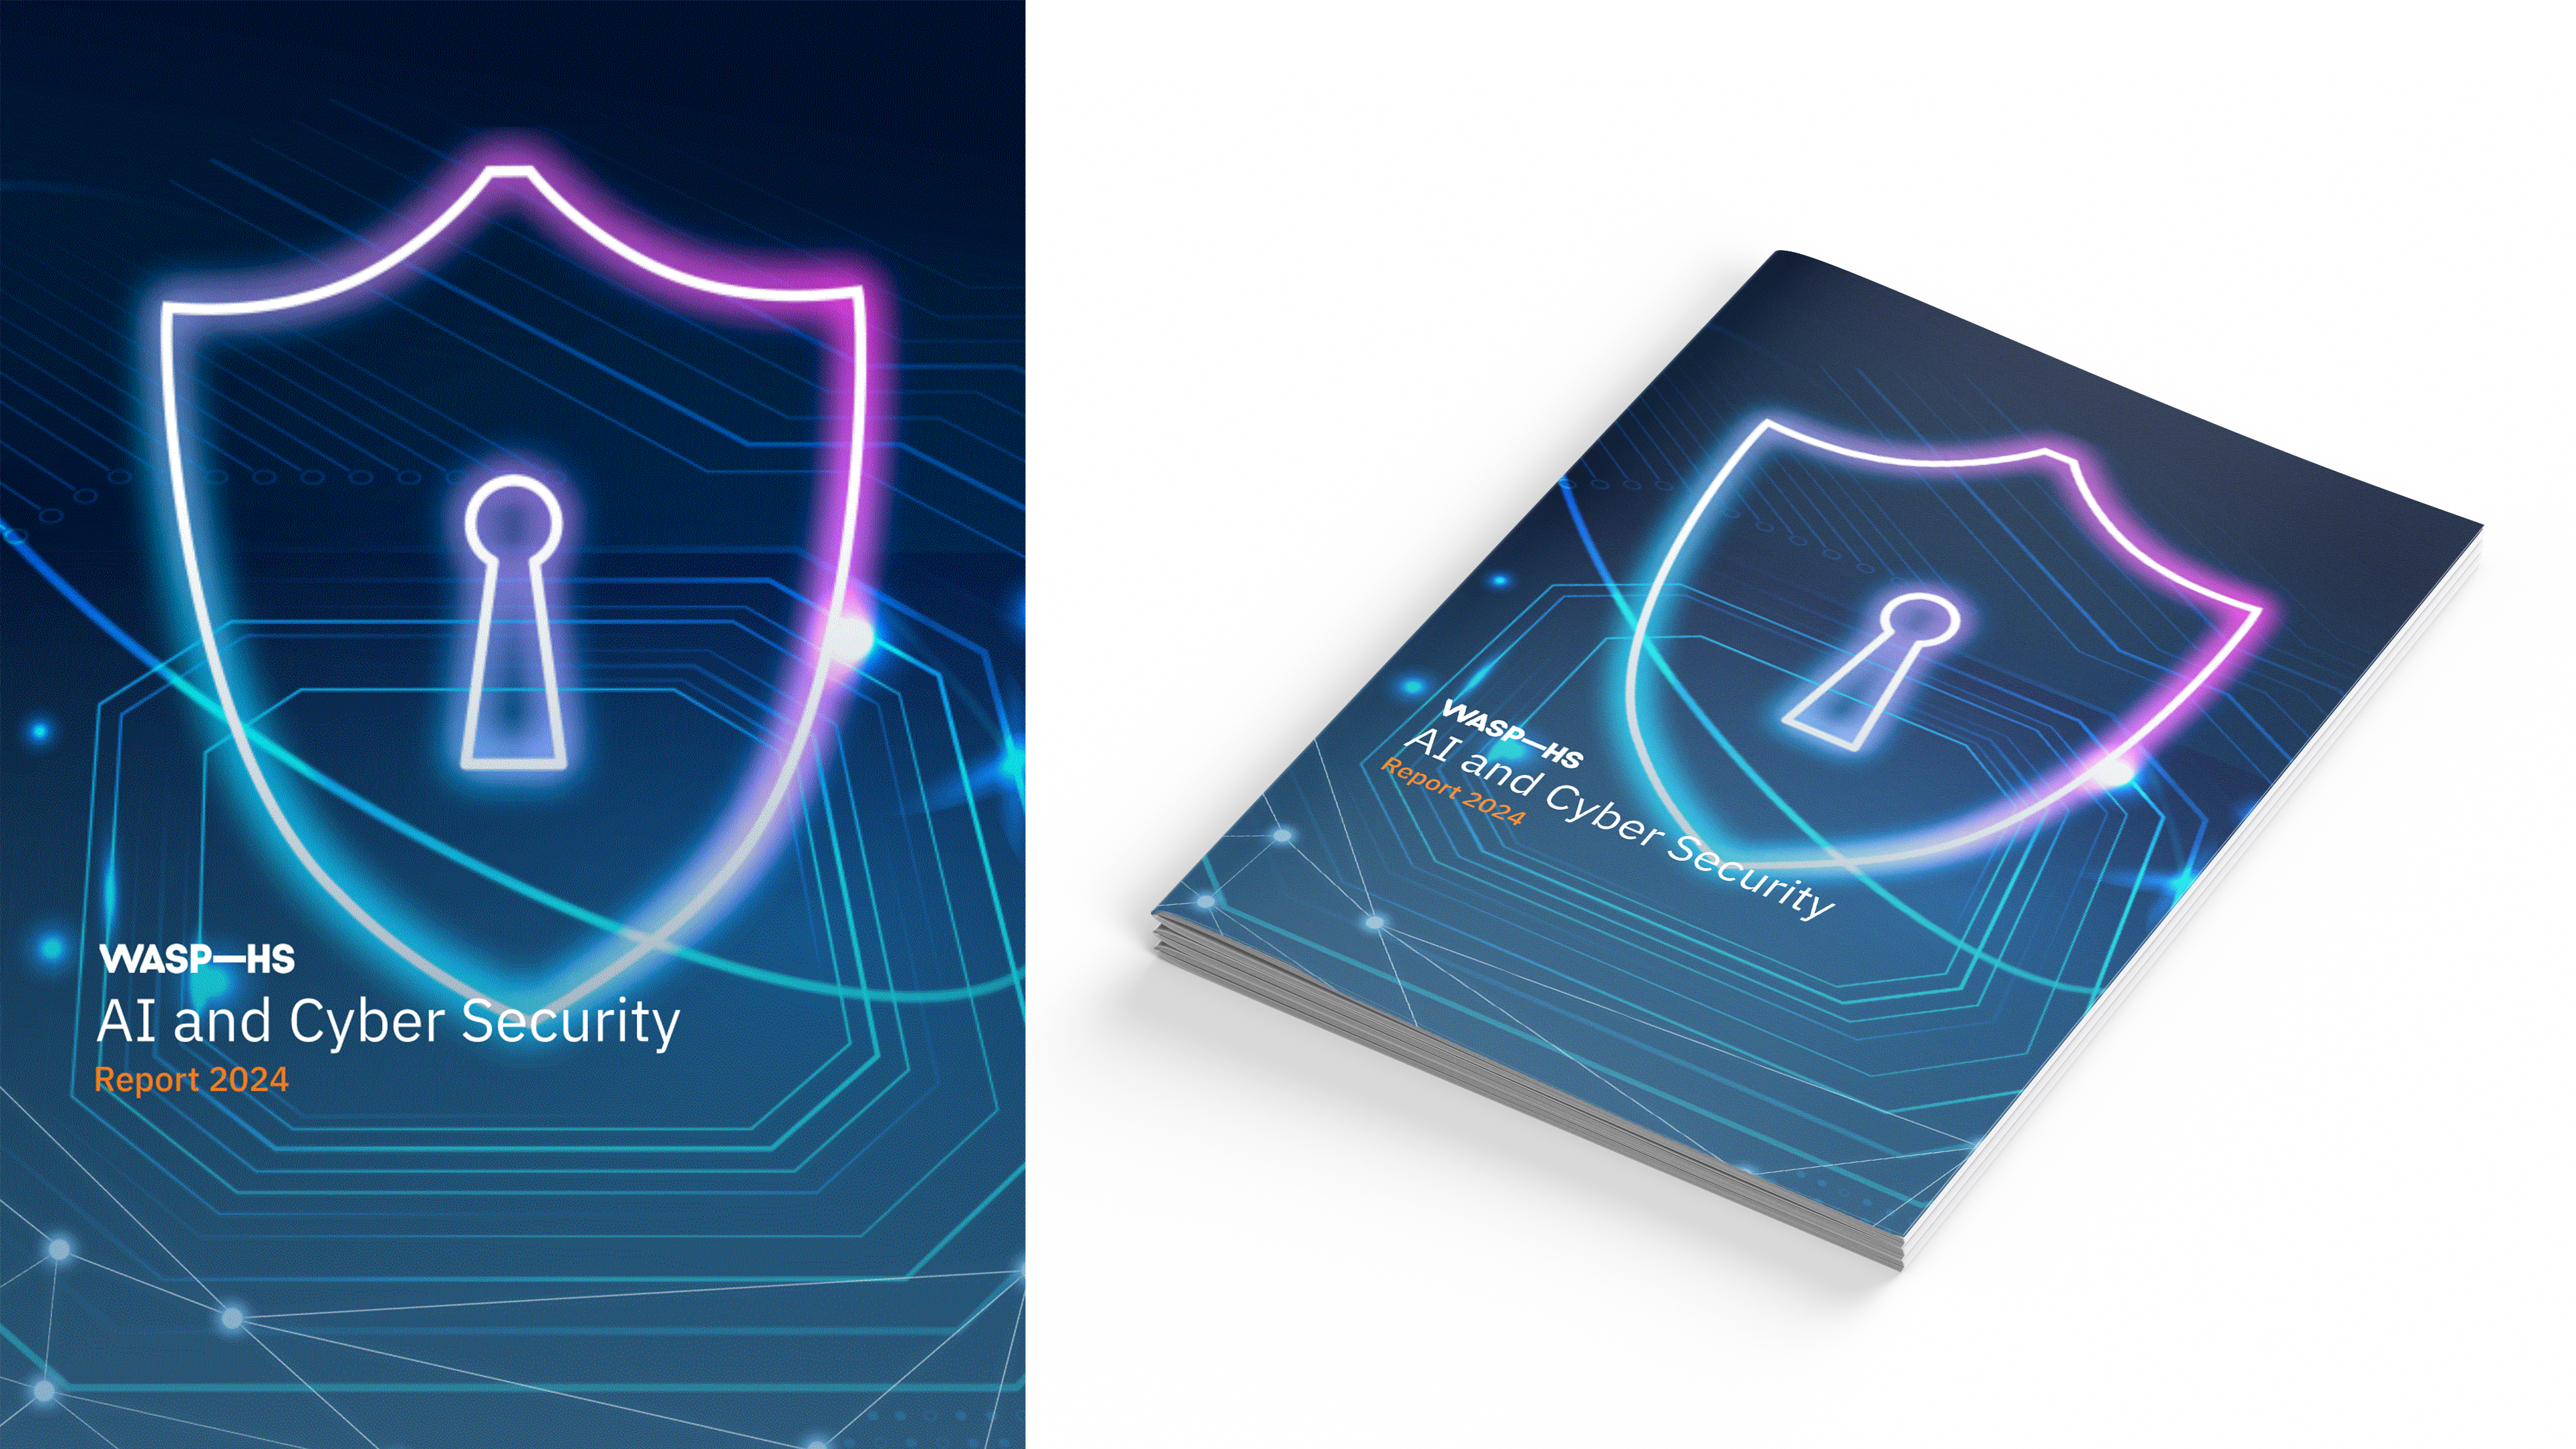 Dark blue brochure with a slight blue and purple shield and a lock. Test says: WASP-HS AI and Cyber Security Report 2024